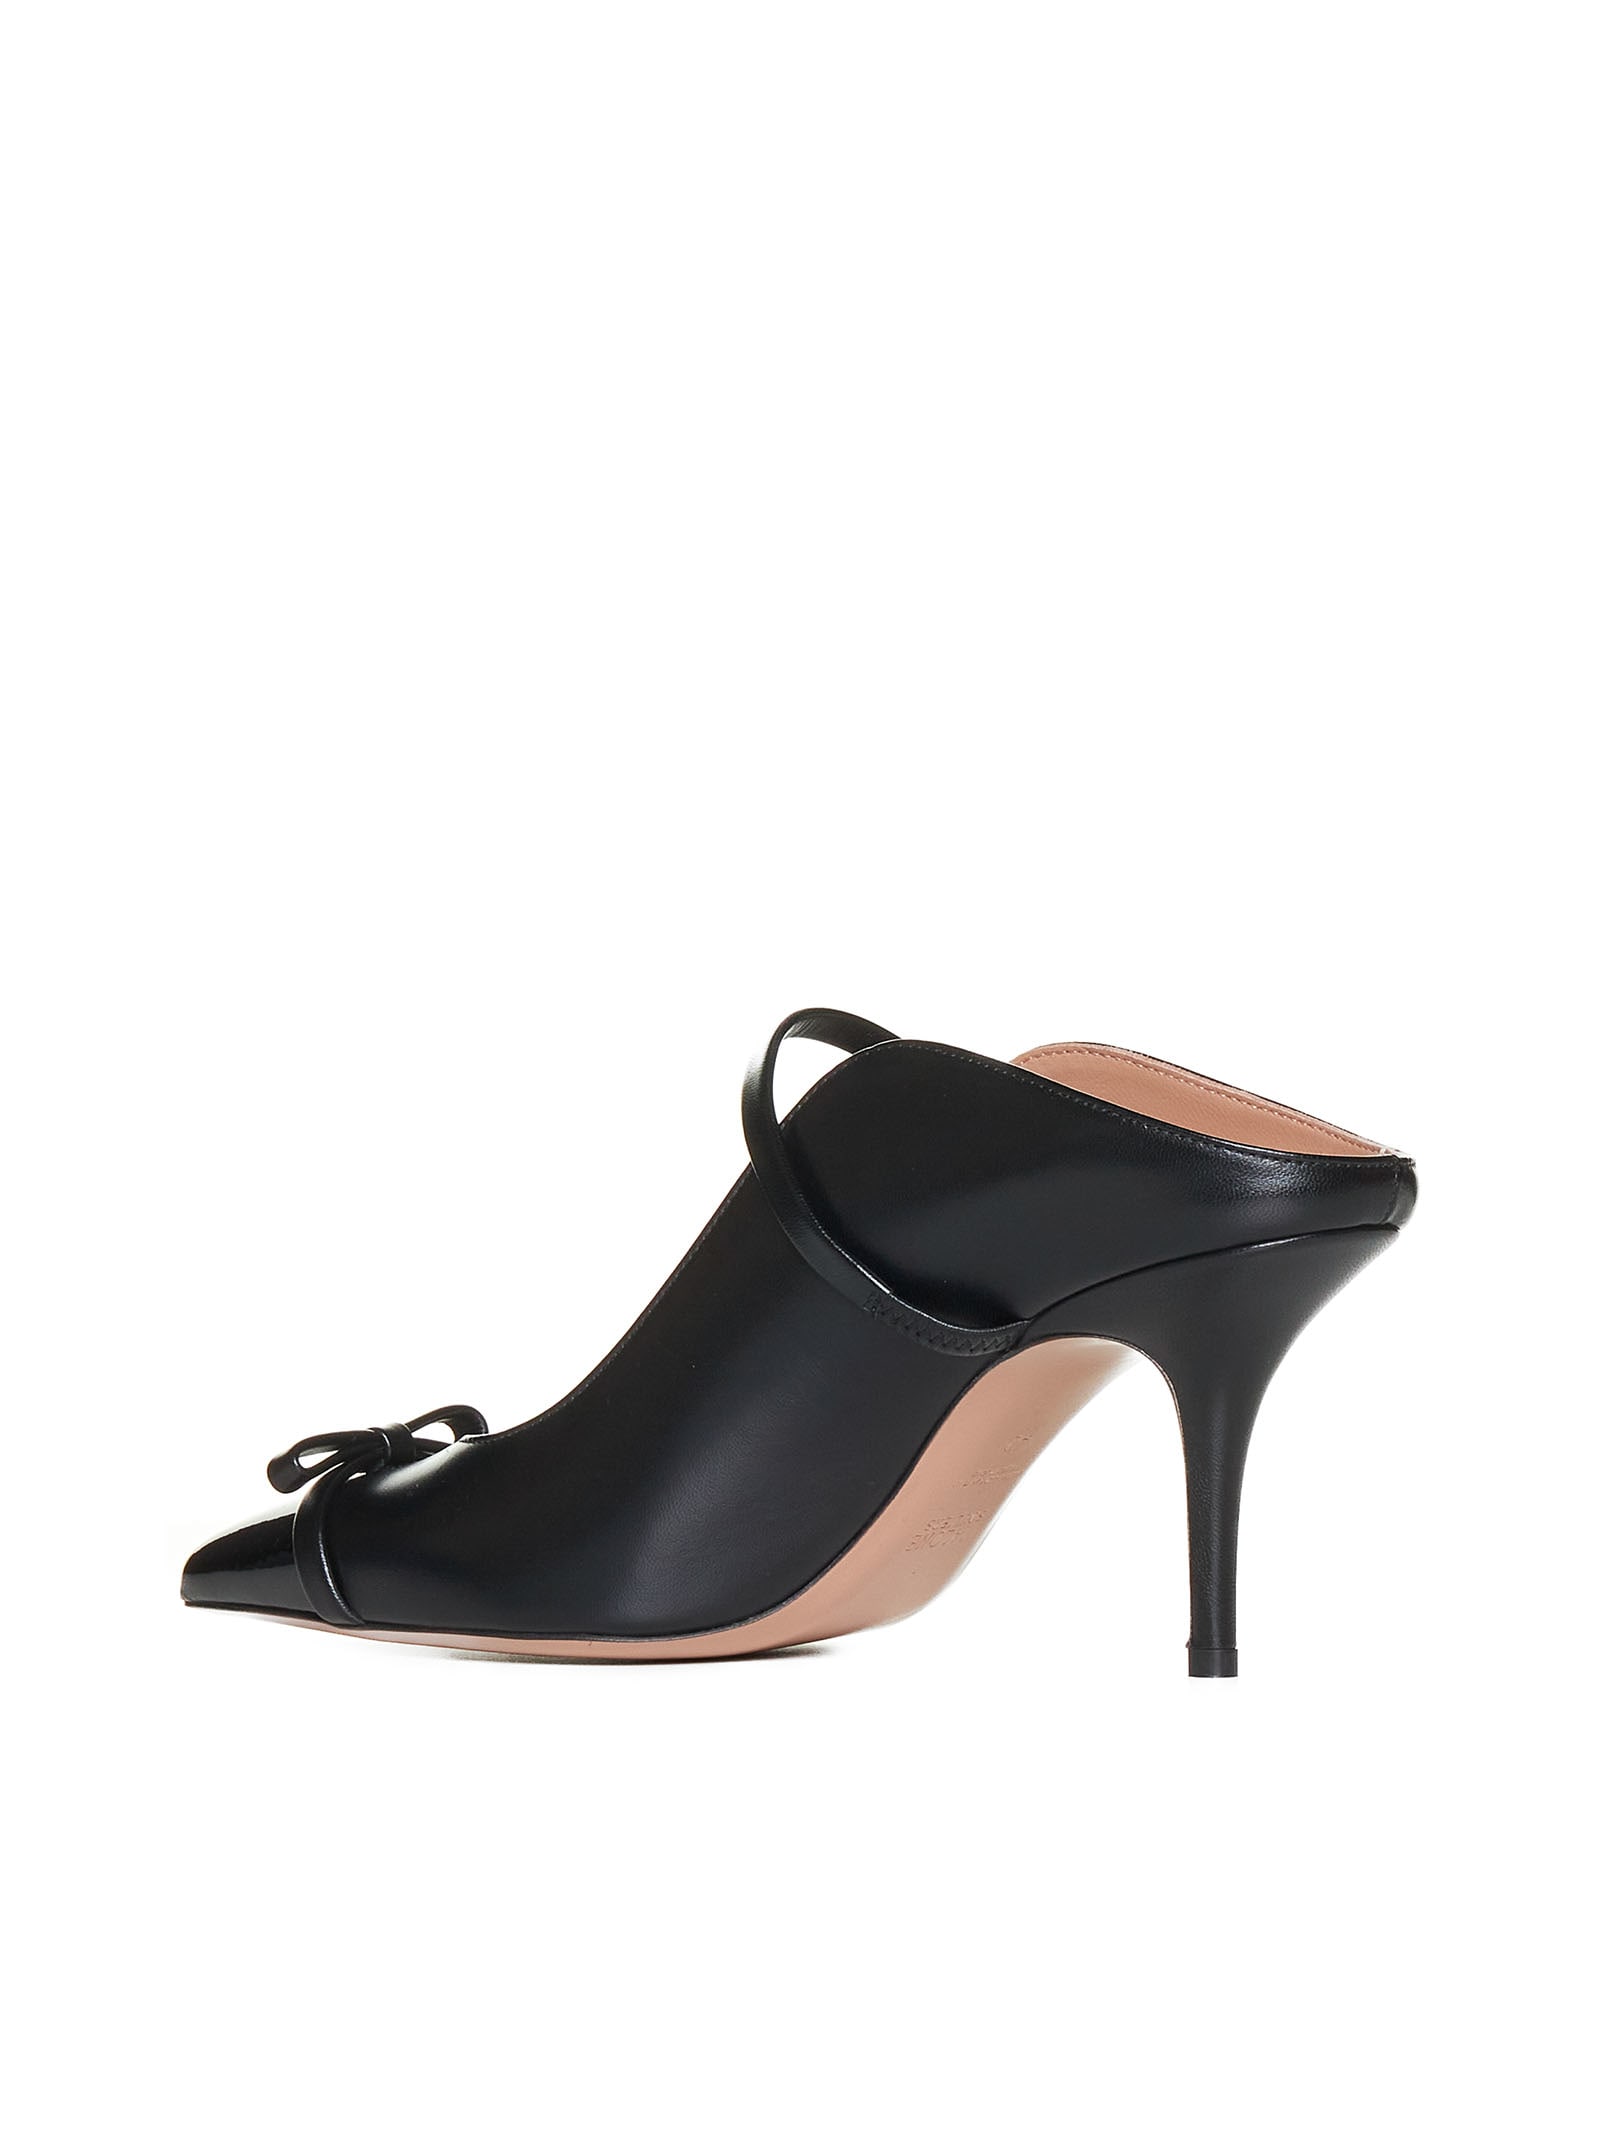 Shop Malone Souliers Sandals In Black